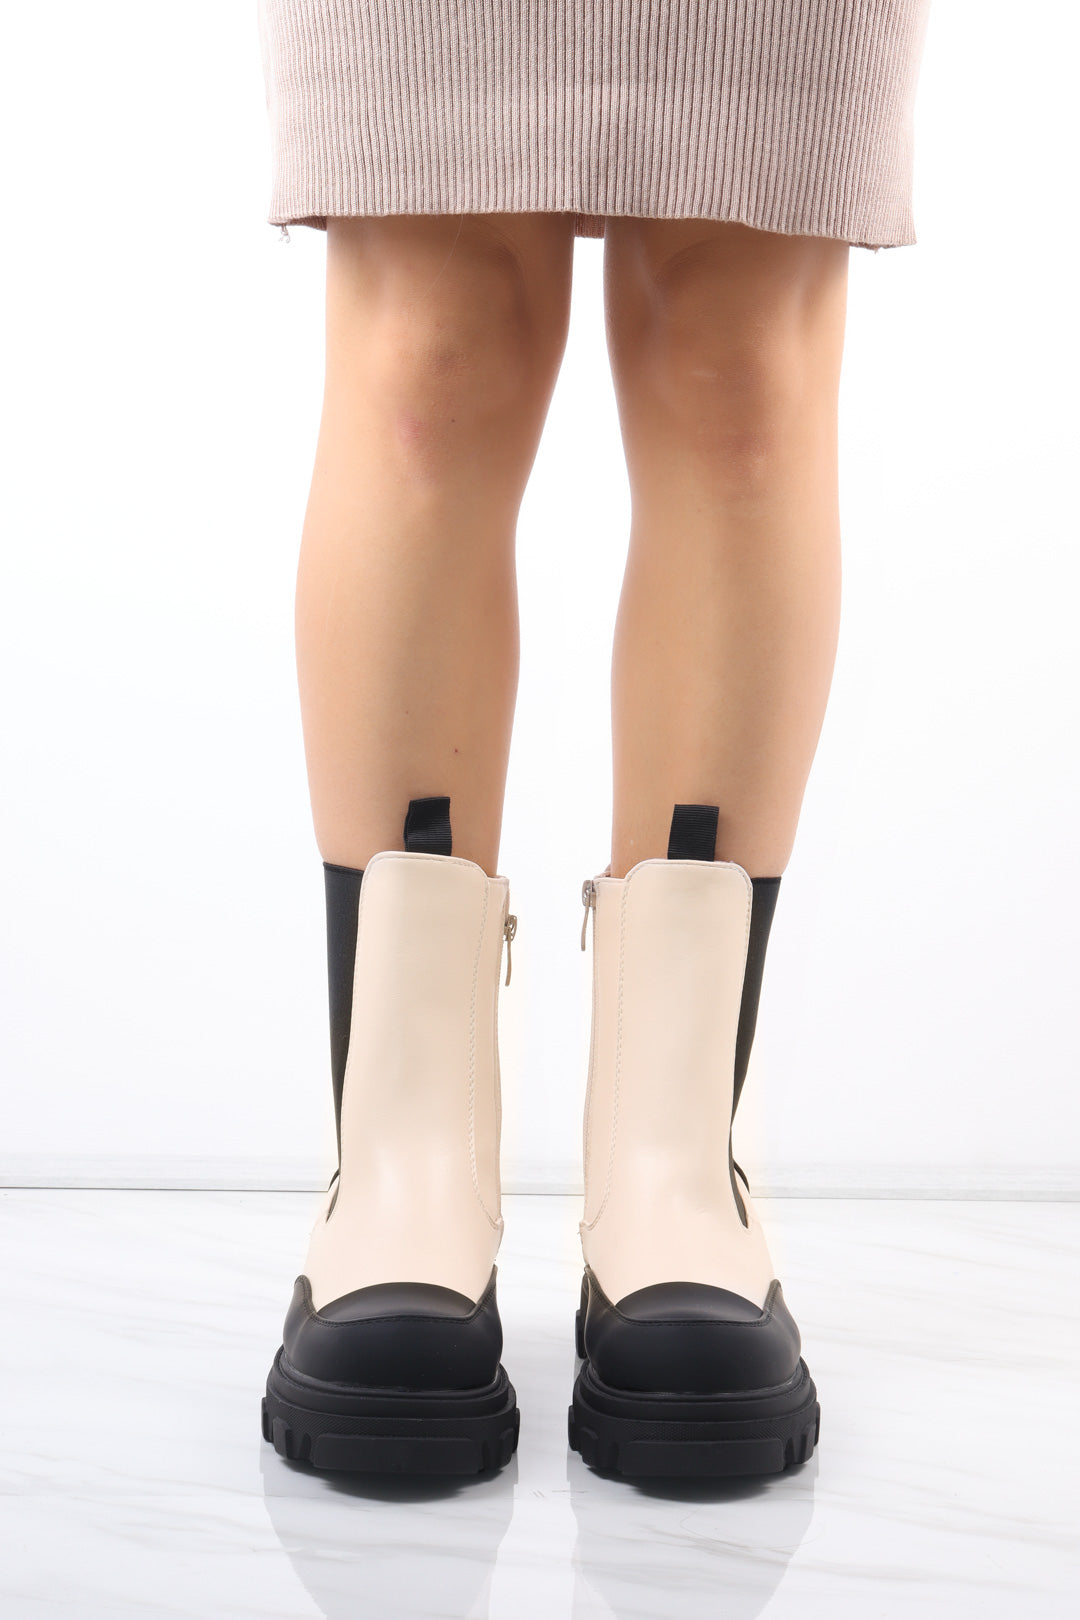 Cream/Black Calf Length Chunky Faux Leather Chelsea Boots